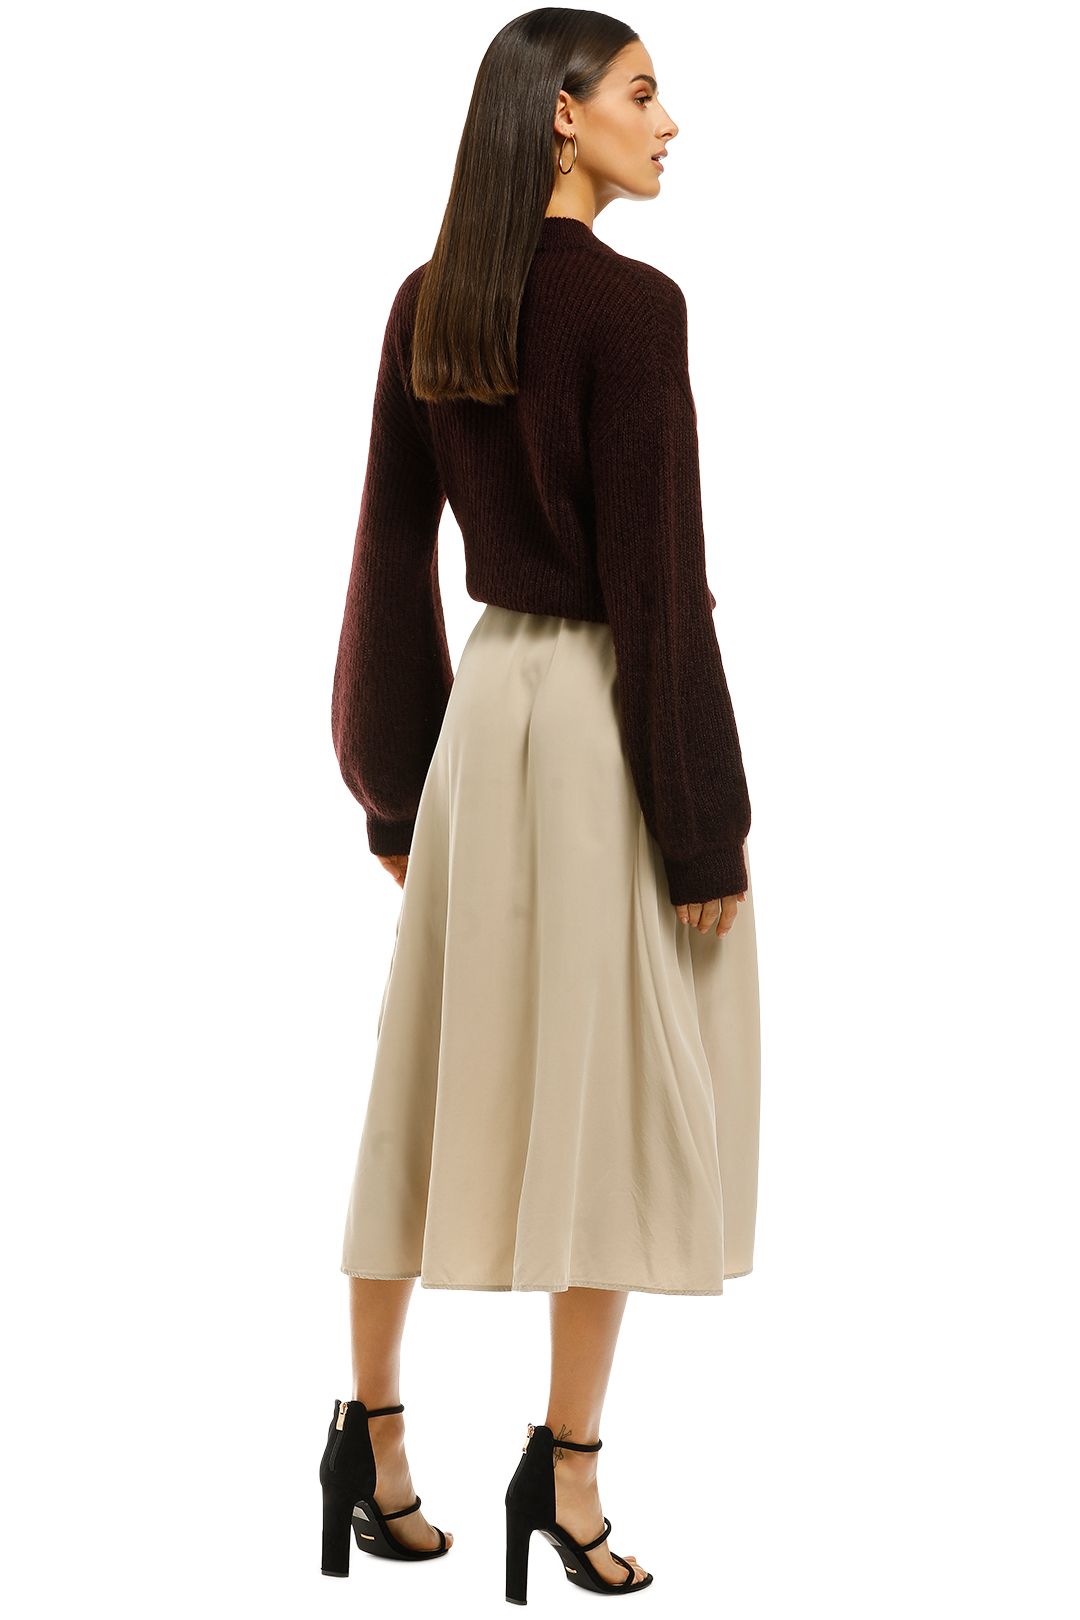 MNG - Buttoned Midi Skirt - Ivory - Back